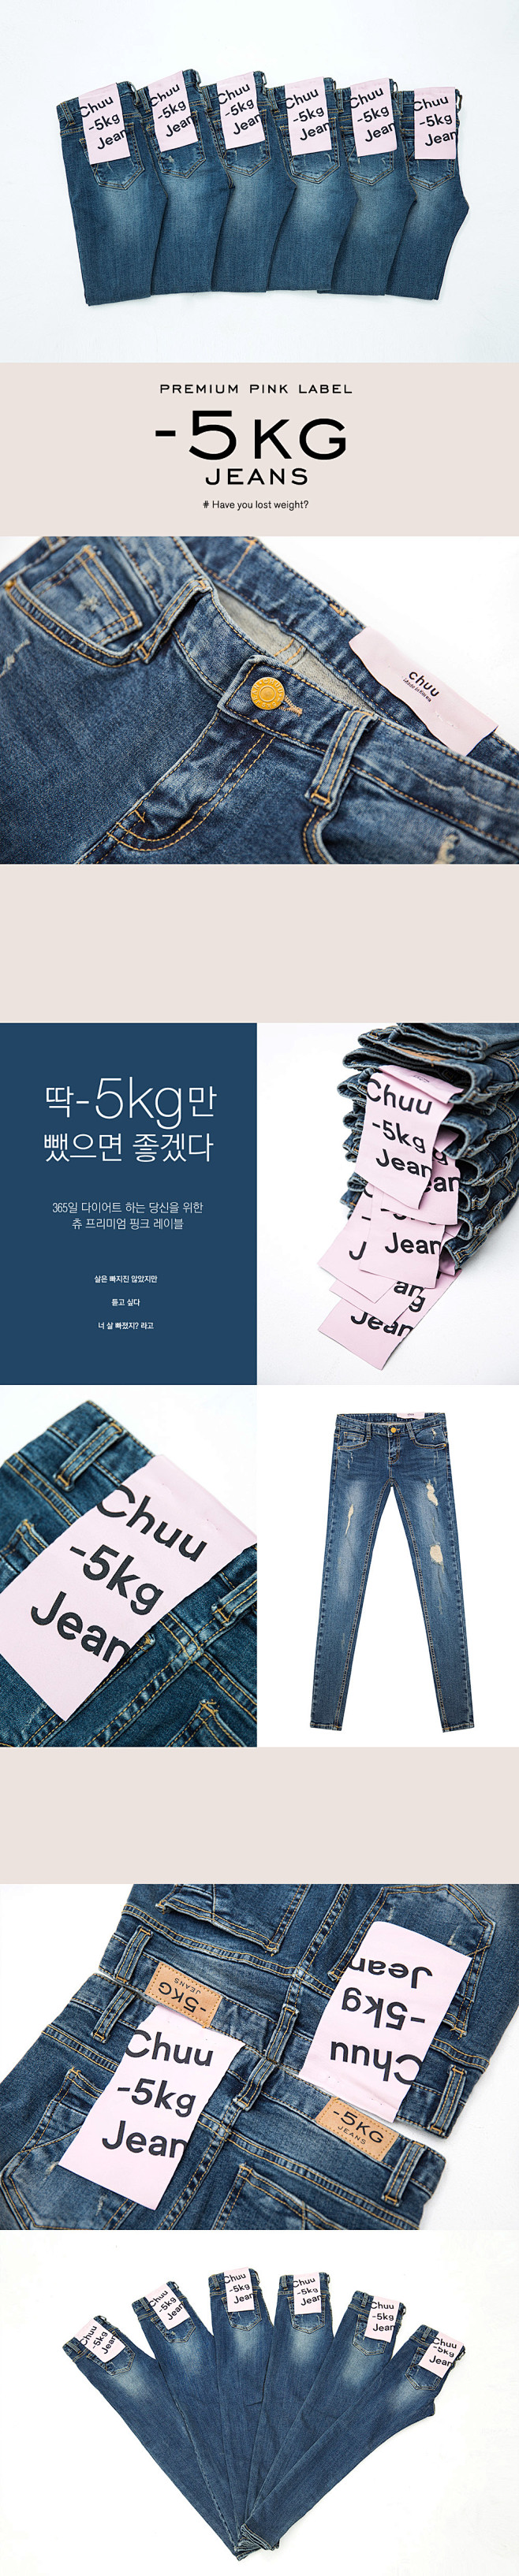 -5KG JEANS vol.28 by...